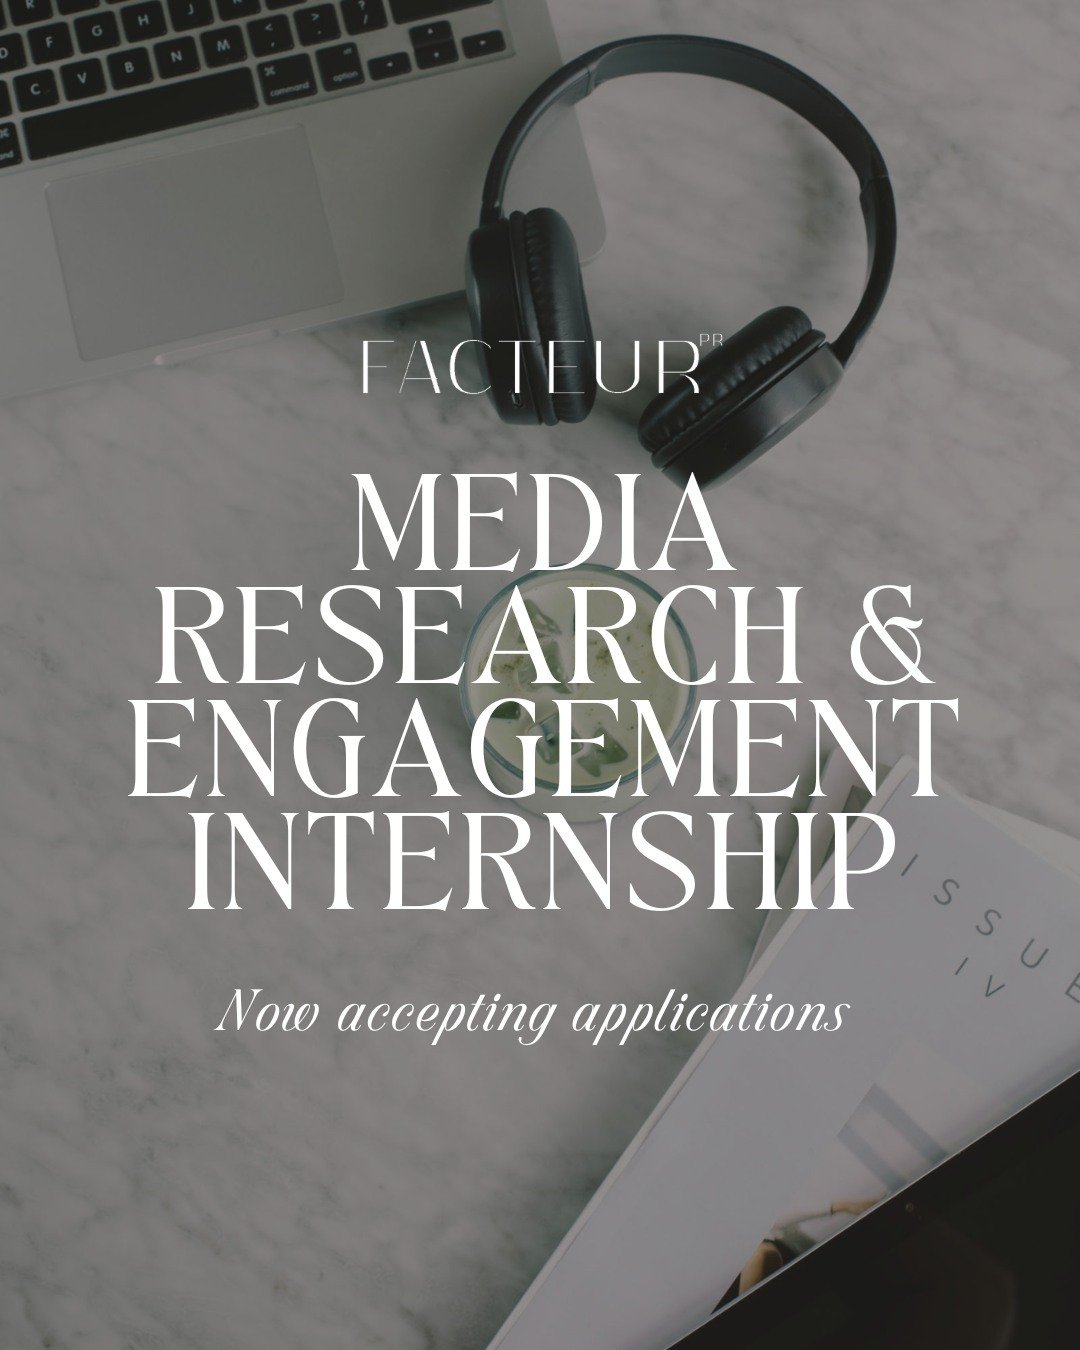 We love our interns! Join our team this summer/fall as FACTEUR PR's next Media Research &amp; Engagement Intern! Scroll to learn more and apply at facteurpr.com/work. 🌿⁠
⁠
.⁠
.⁠
.⁠
.⁠
.⁠
.⁠
.⁠
.⁠
#pr #publicrelations #digitalmarketing #socialmedia  